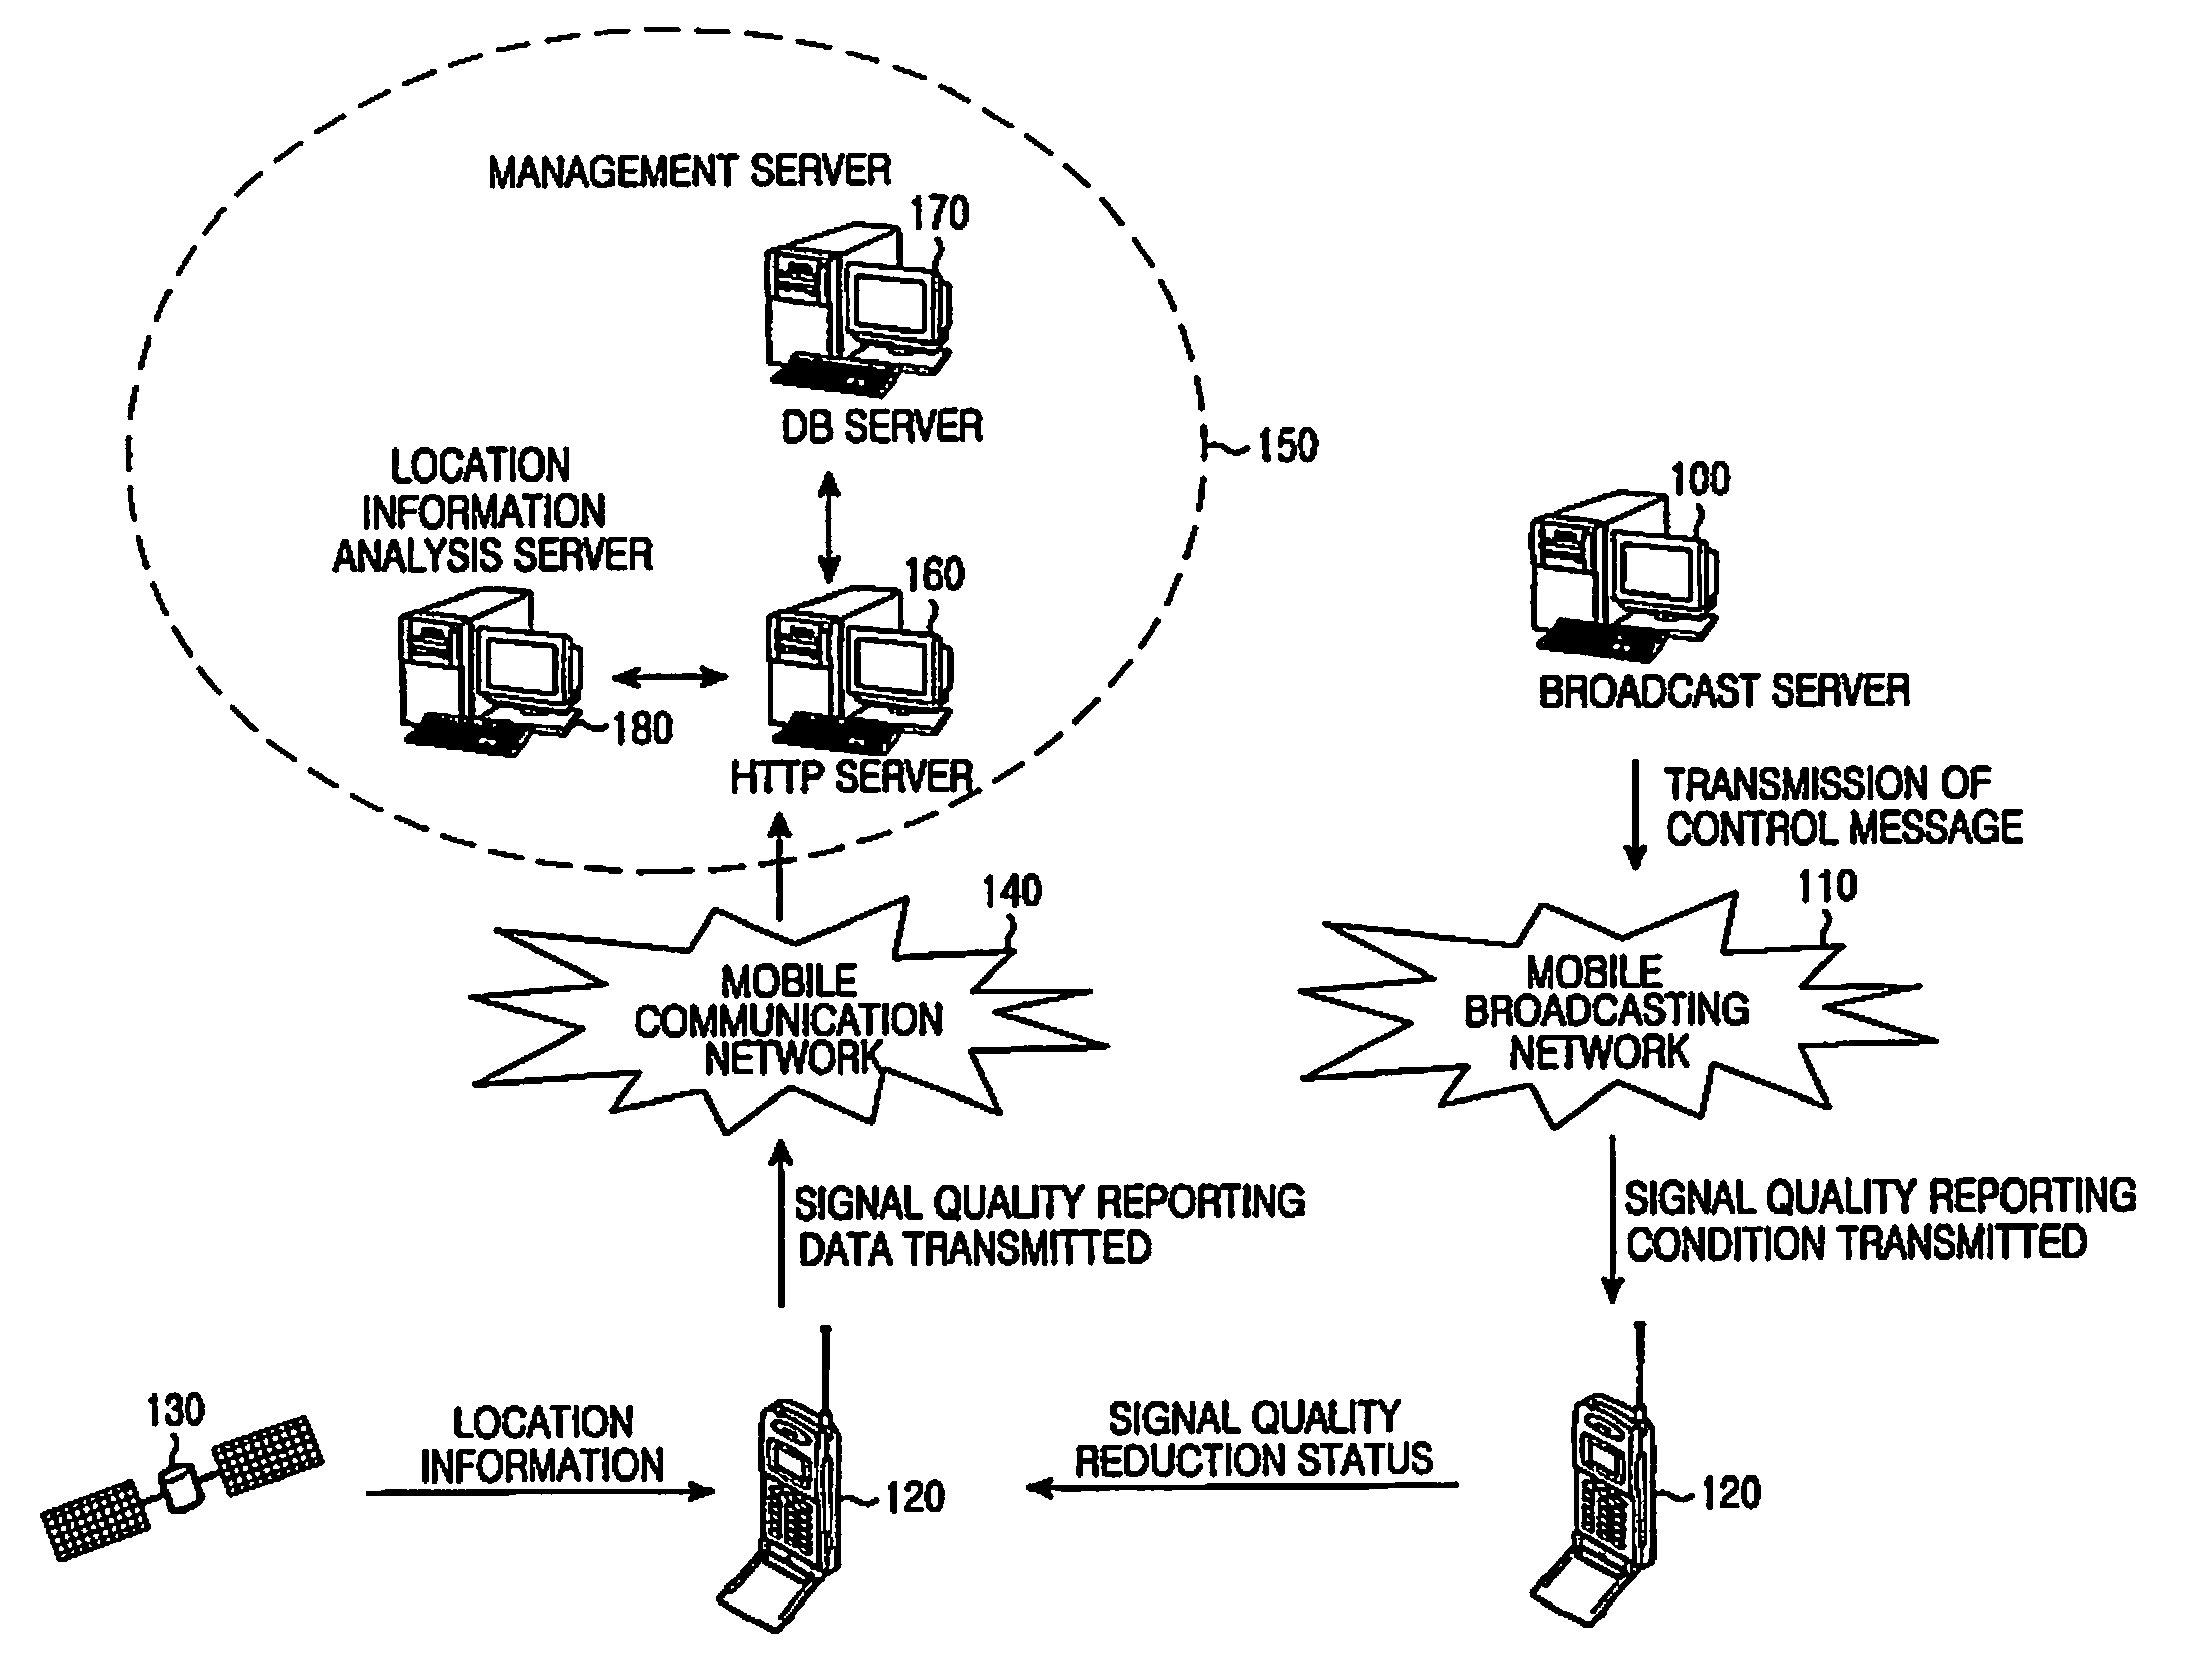 Apparatus and method for measuring signal quality in a portable broadcasting network and system supporting the same